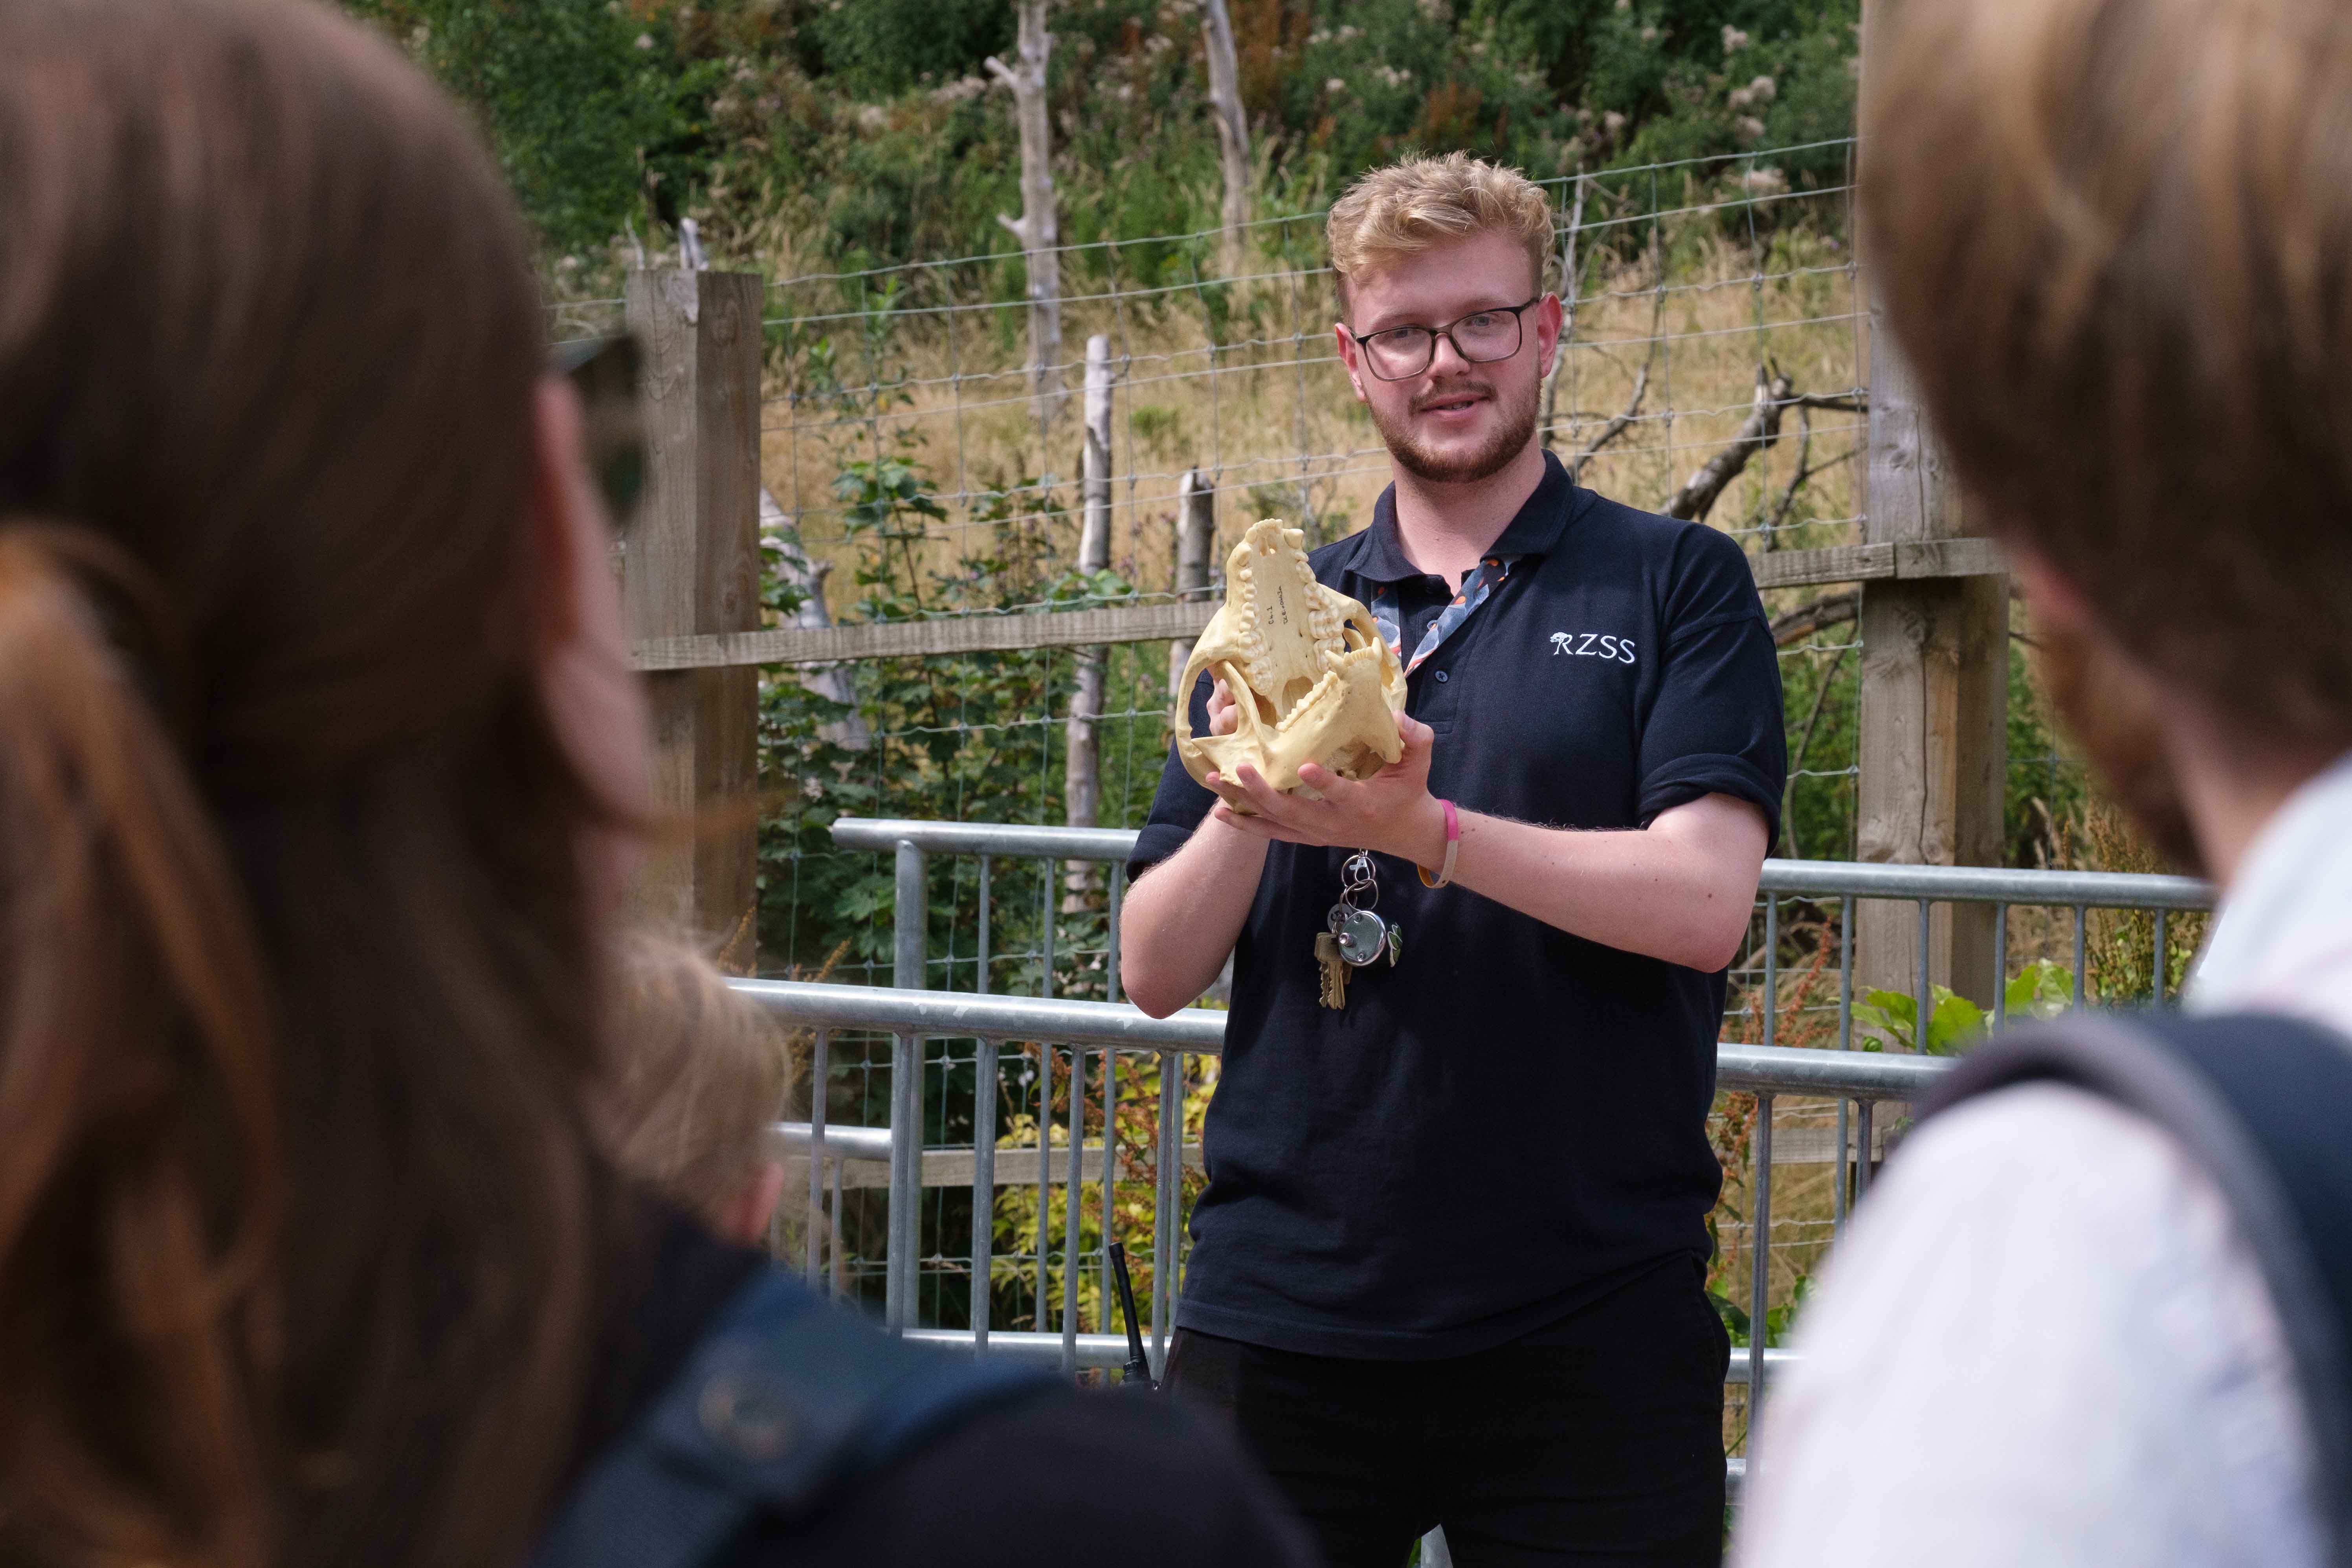 Maurice Hickman giving a talk to visitors about giant pandas IMAGE: Robin Mair 2022